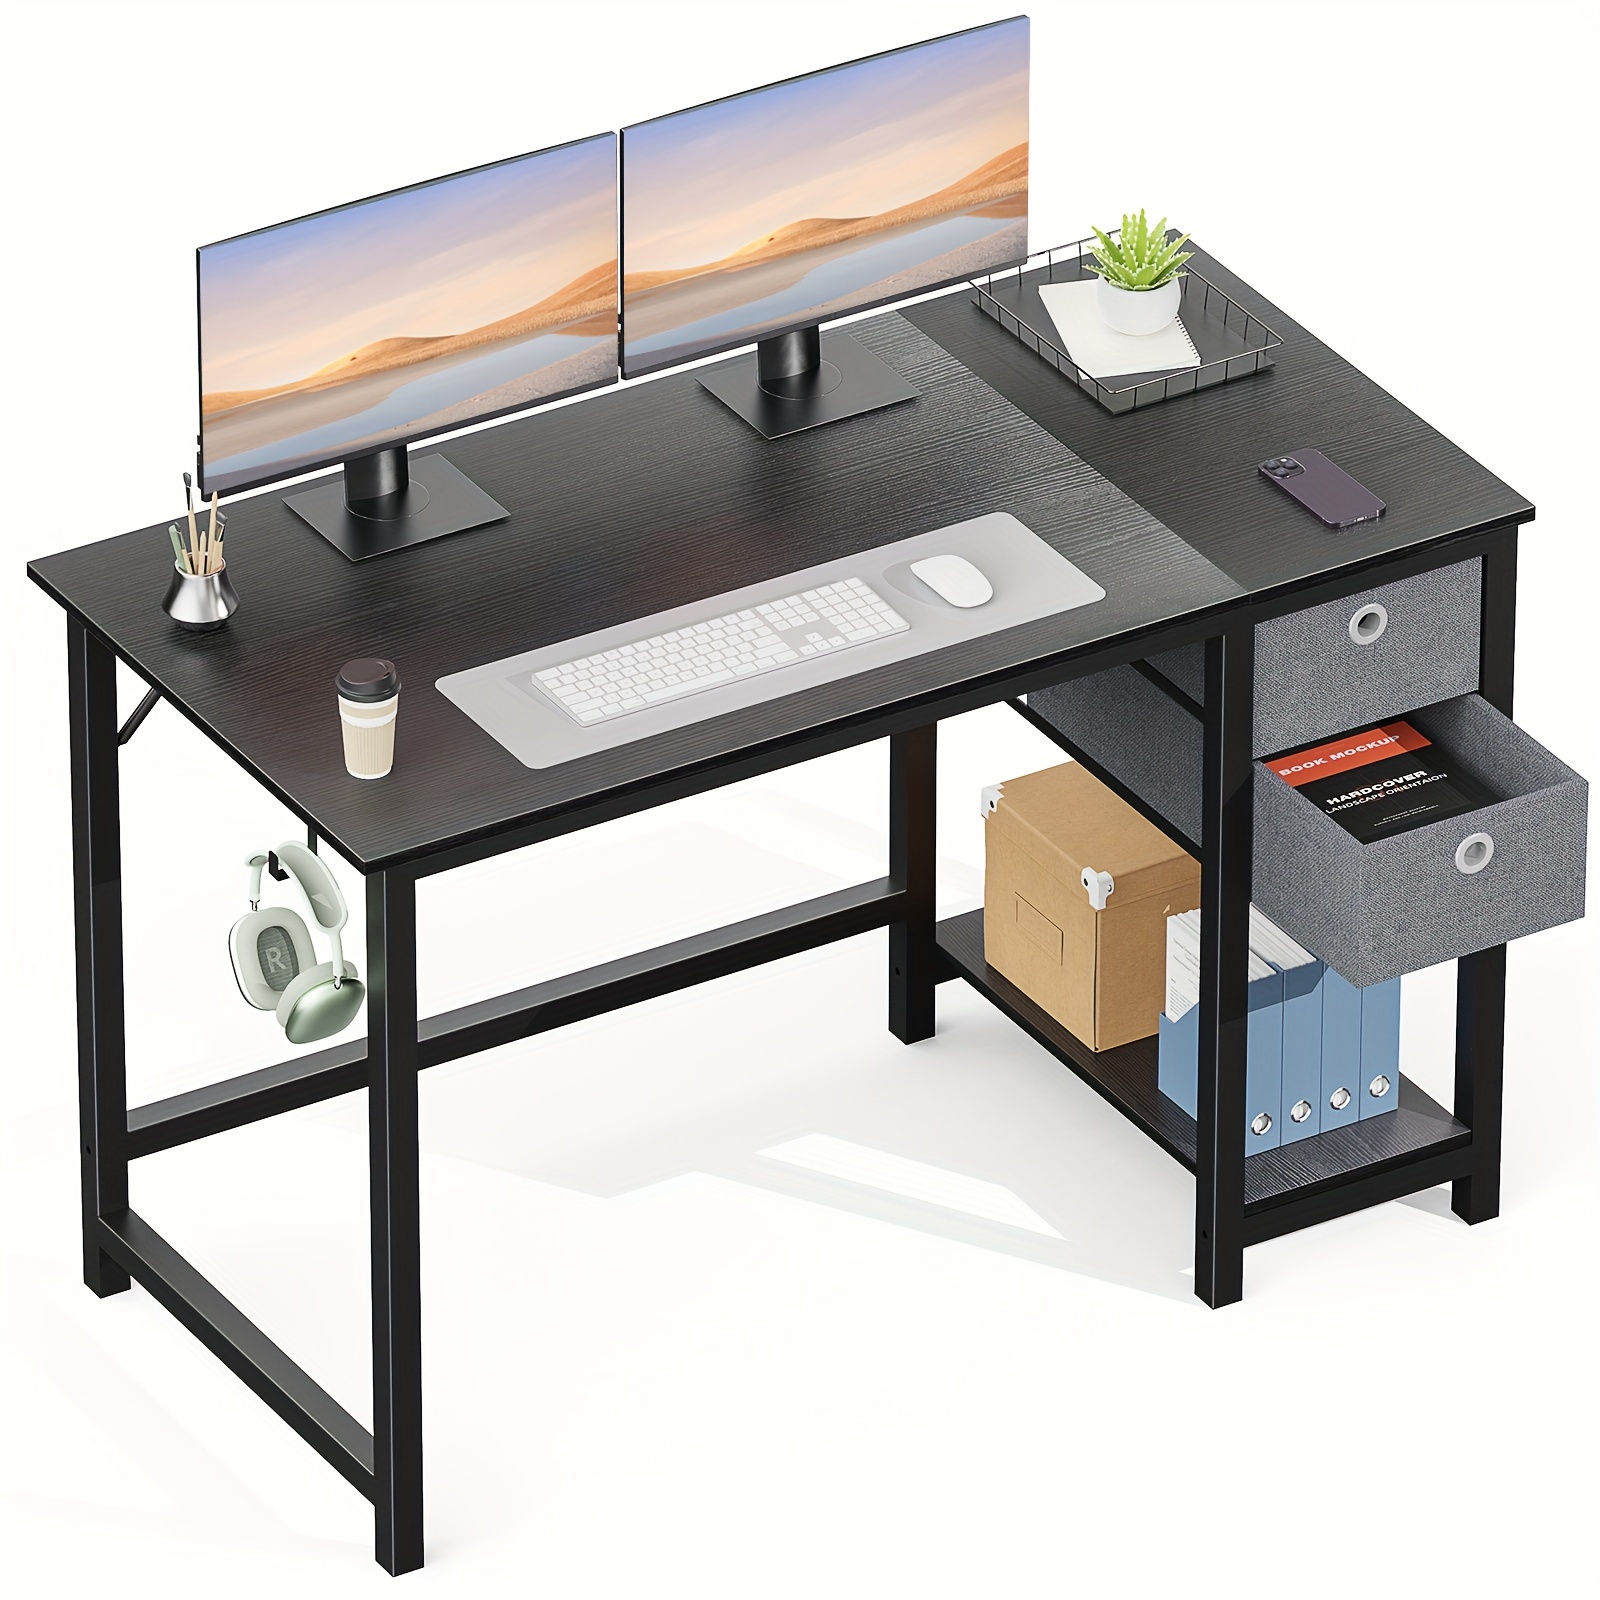 

47 Inch Computer Desk, Small Office Desk With Storage Drawers, Modern Simple Style Writing Study Pc Work Table For Home Bedroom Small Spaces